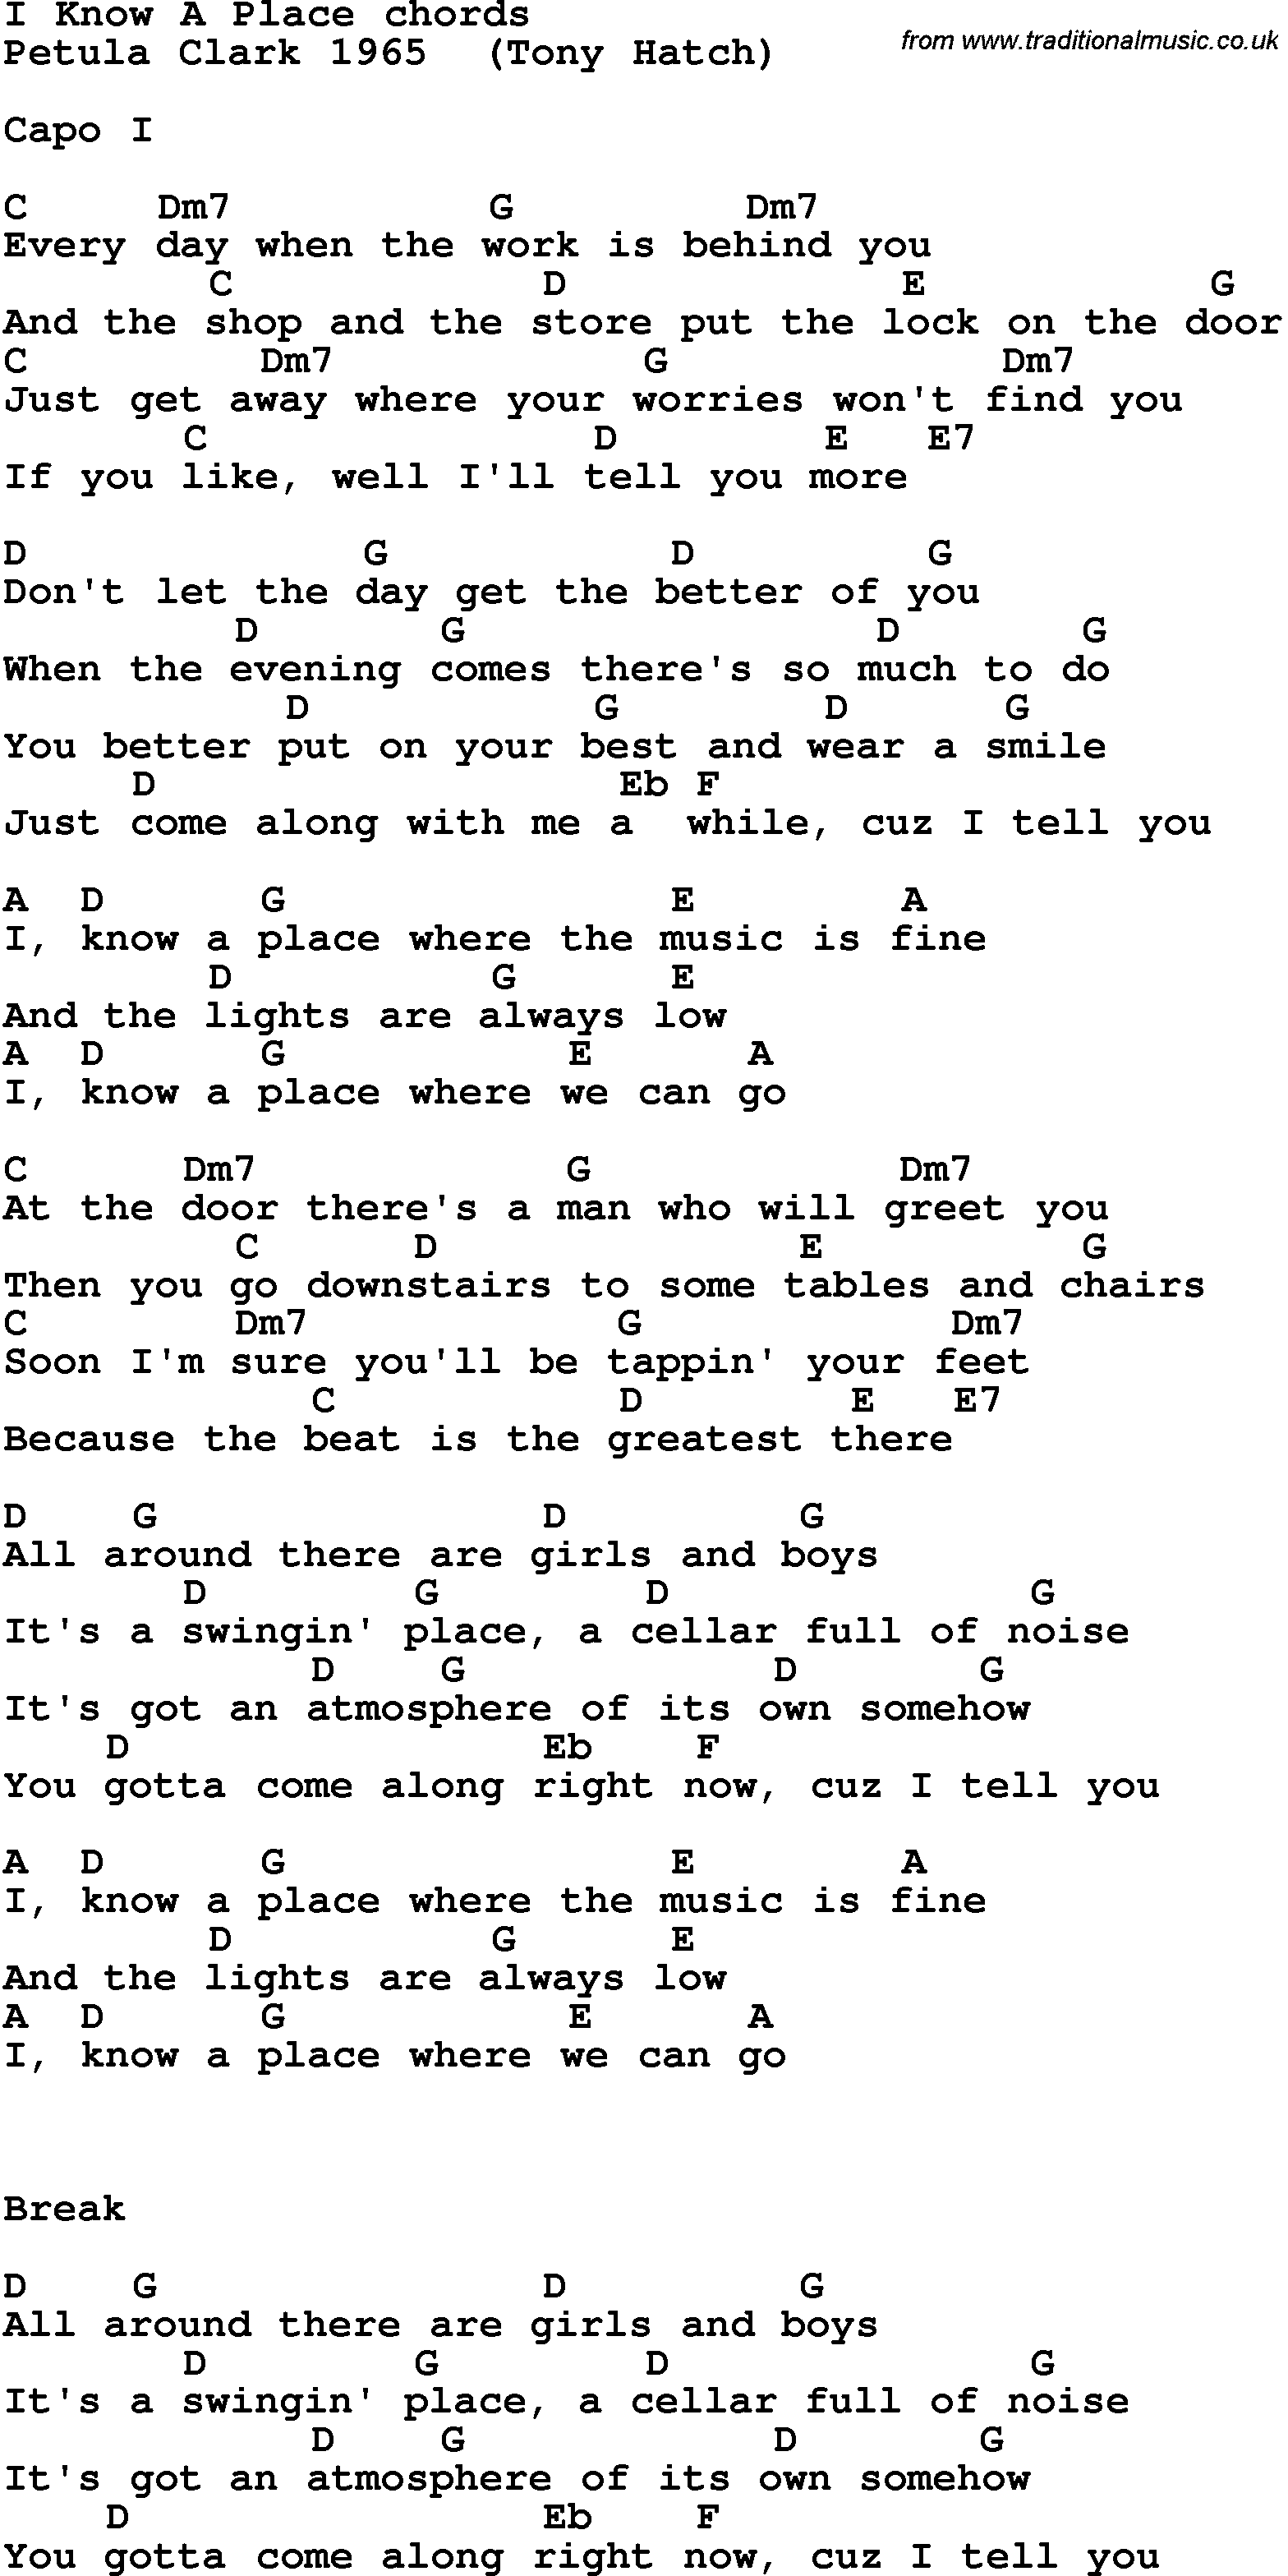 Song Lyrics with guitar chords for I Know A Place